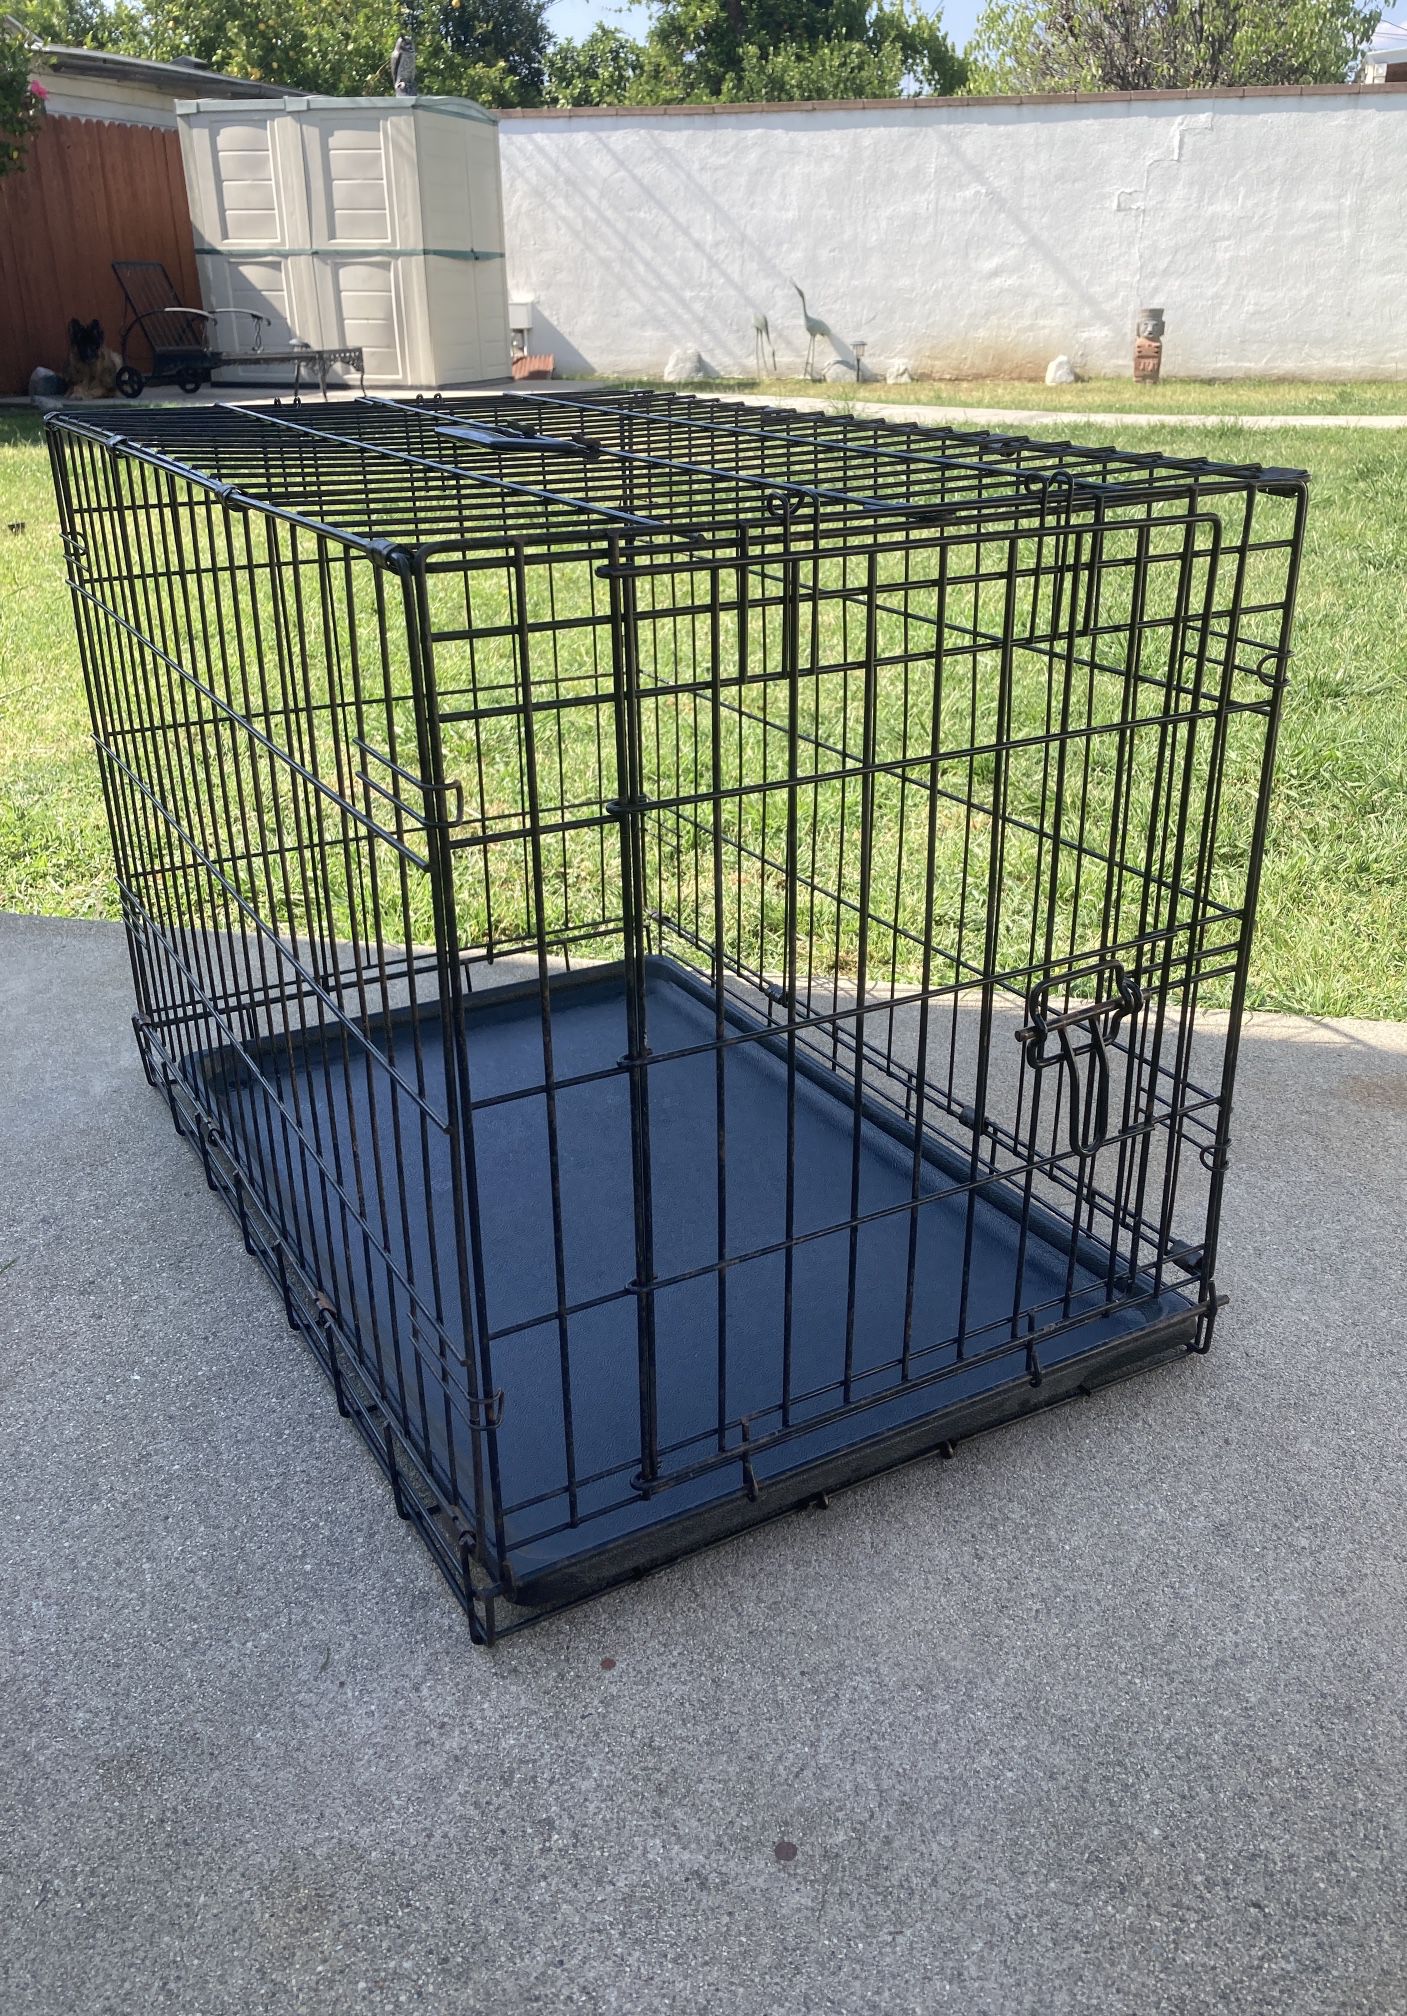 Dog Crate- Metal- Has Bottom Tray & Carry Handle! Good Condition & Clean! 